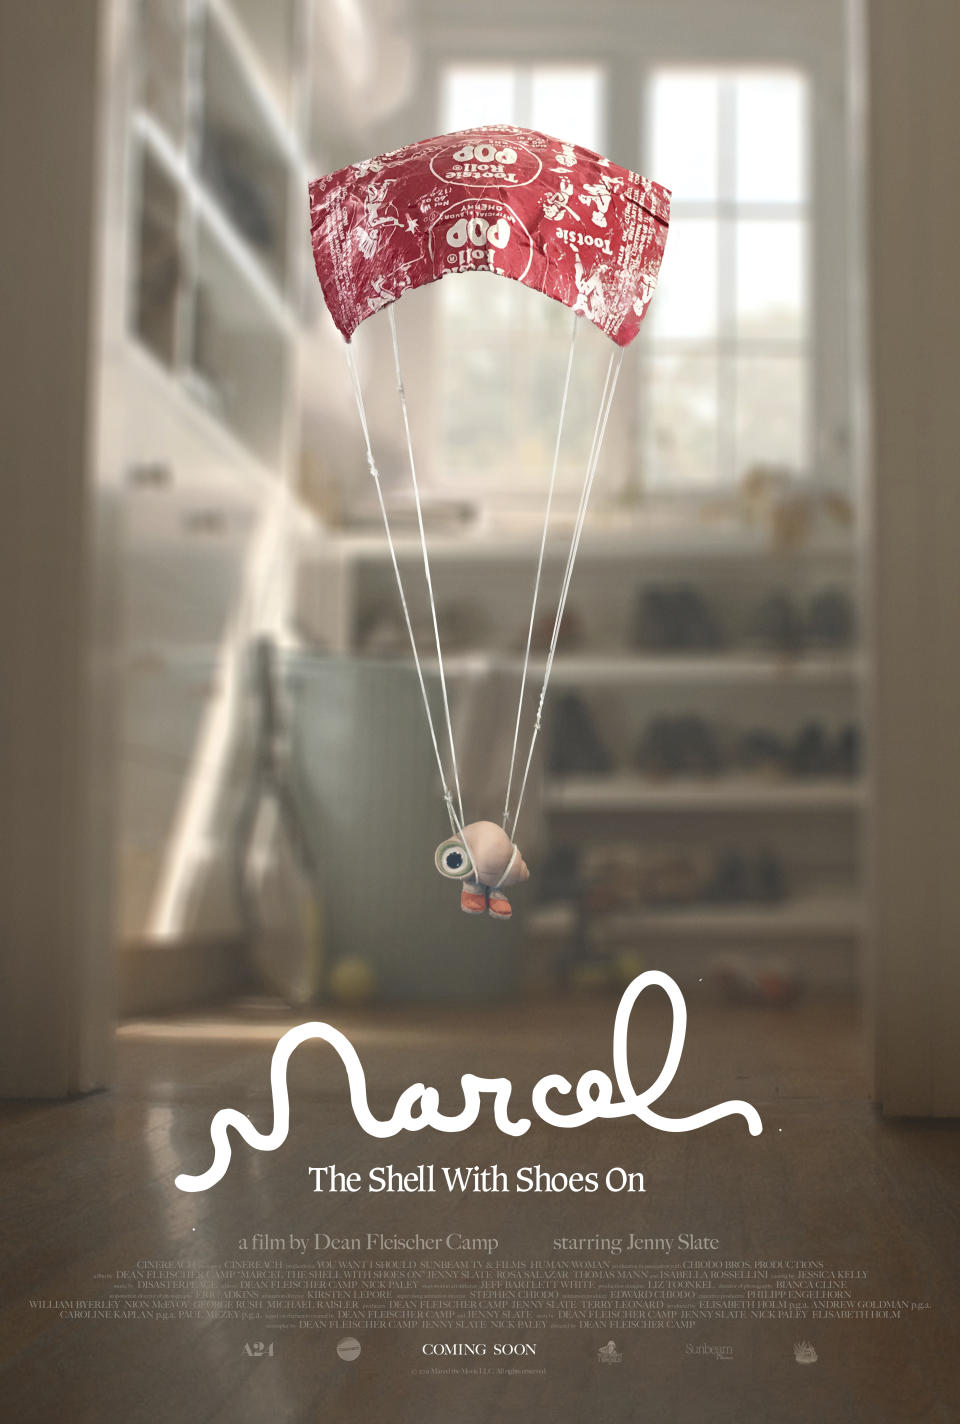 This image released by A24 shows promotional art for "Marcel the Shell with Shoes On," releasing June 24. (A24 via AP)